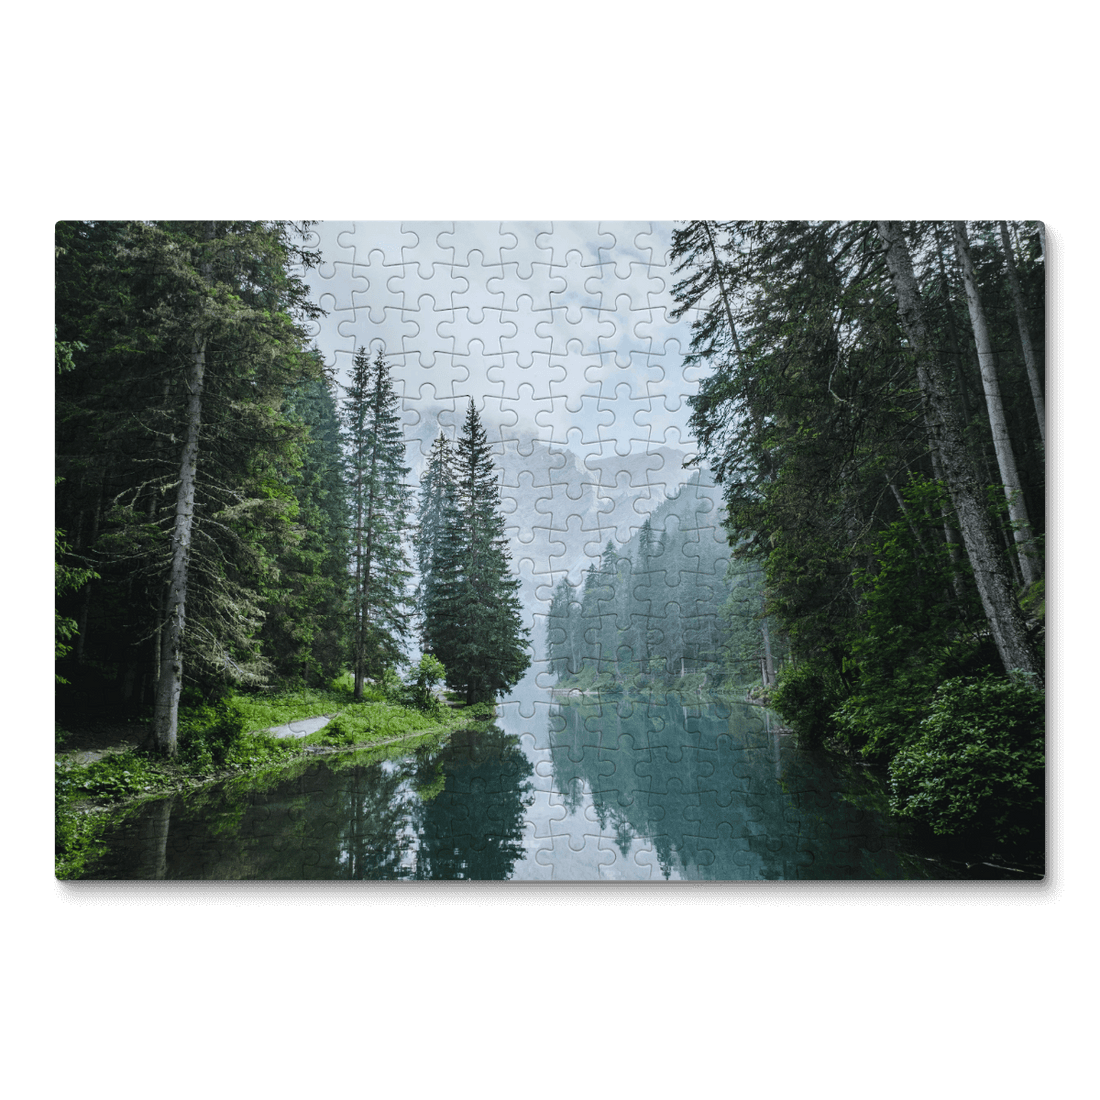 A picture of a forrest and water on a puzzle